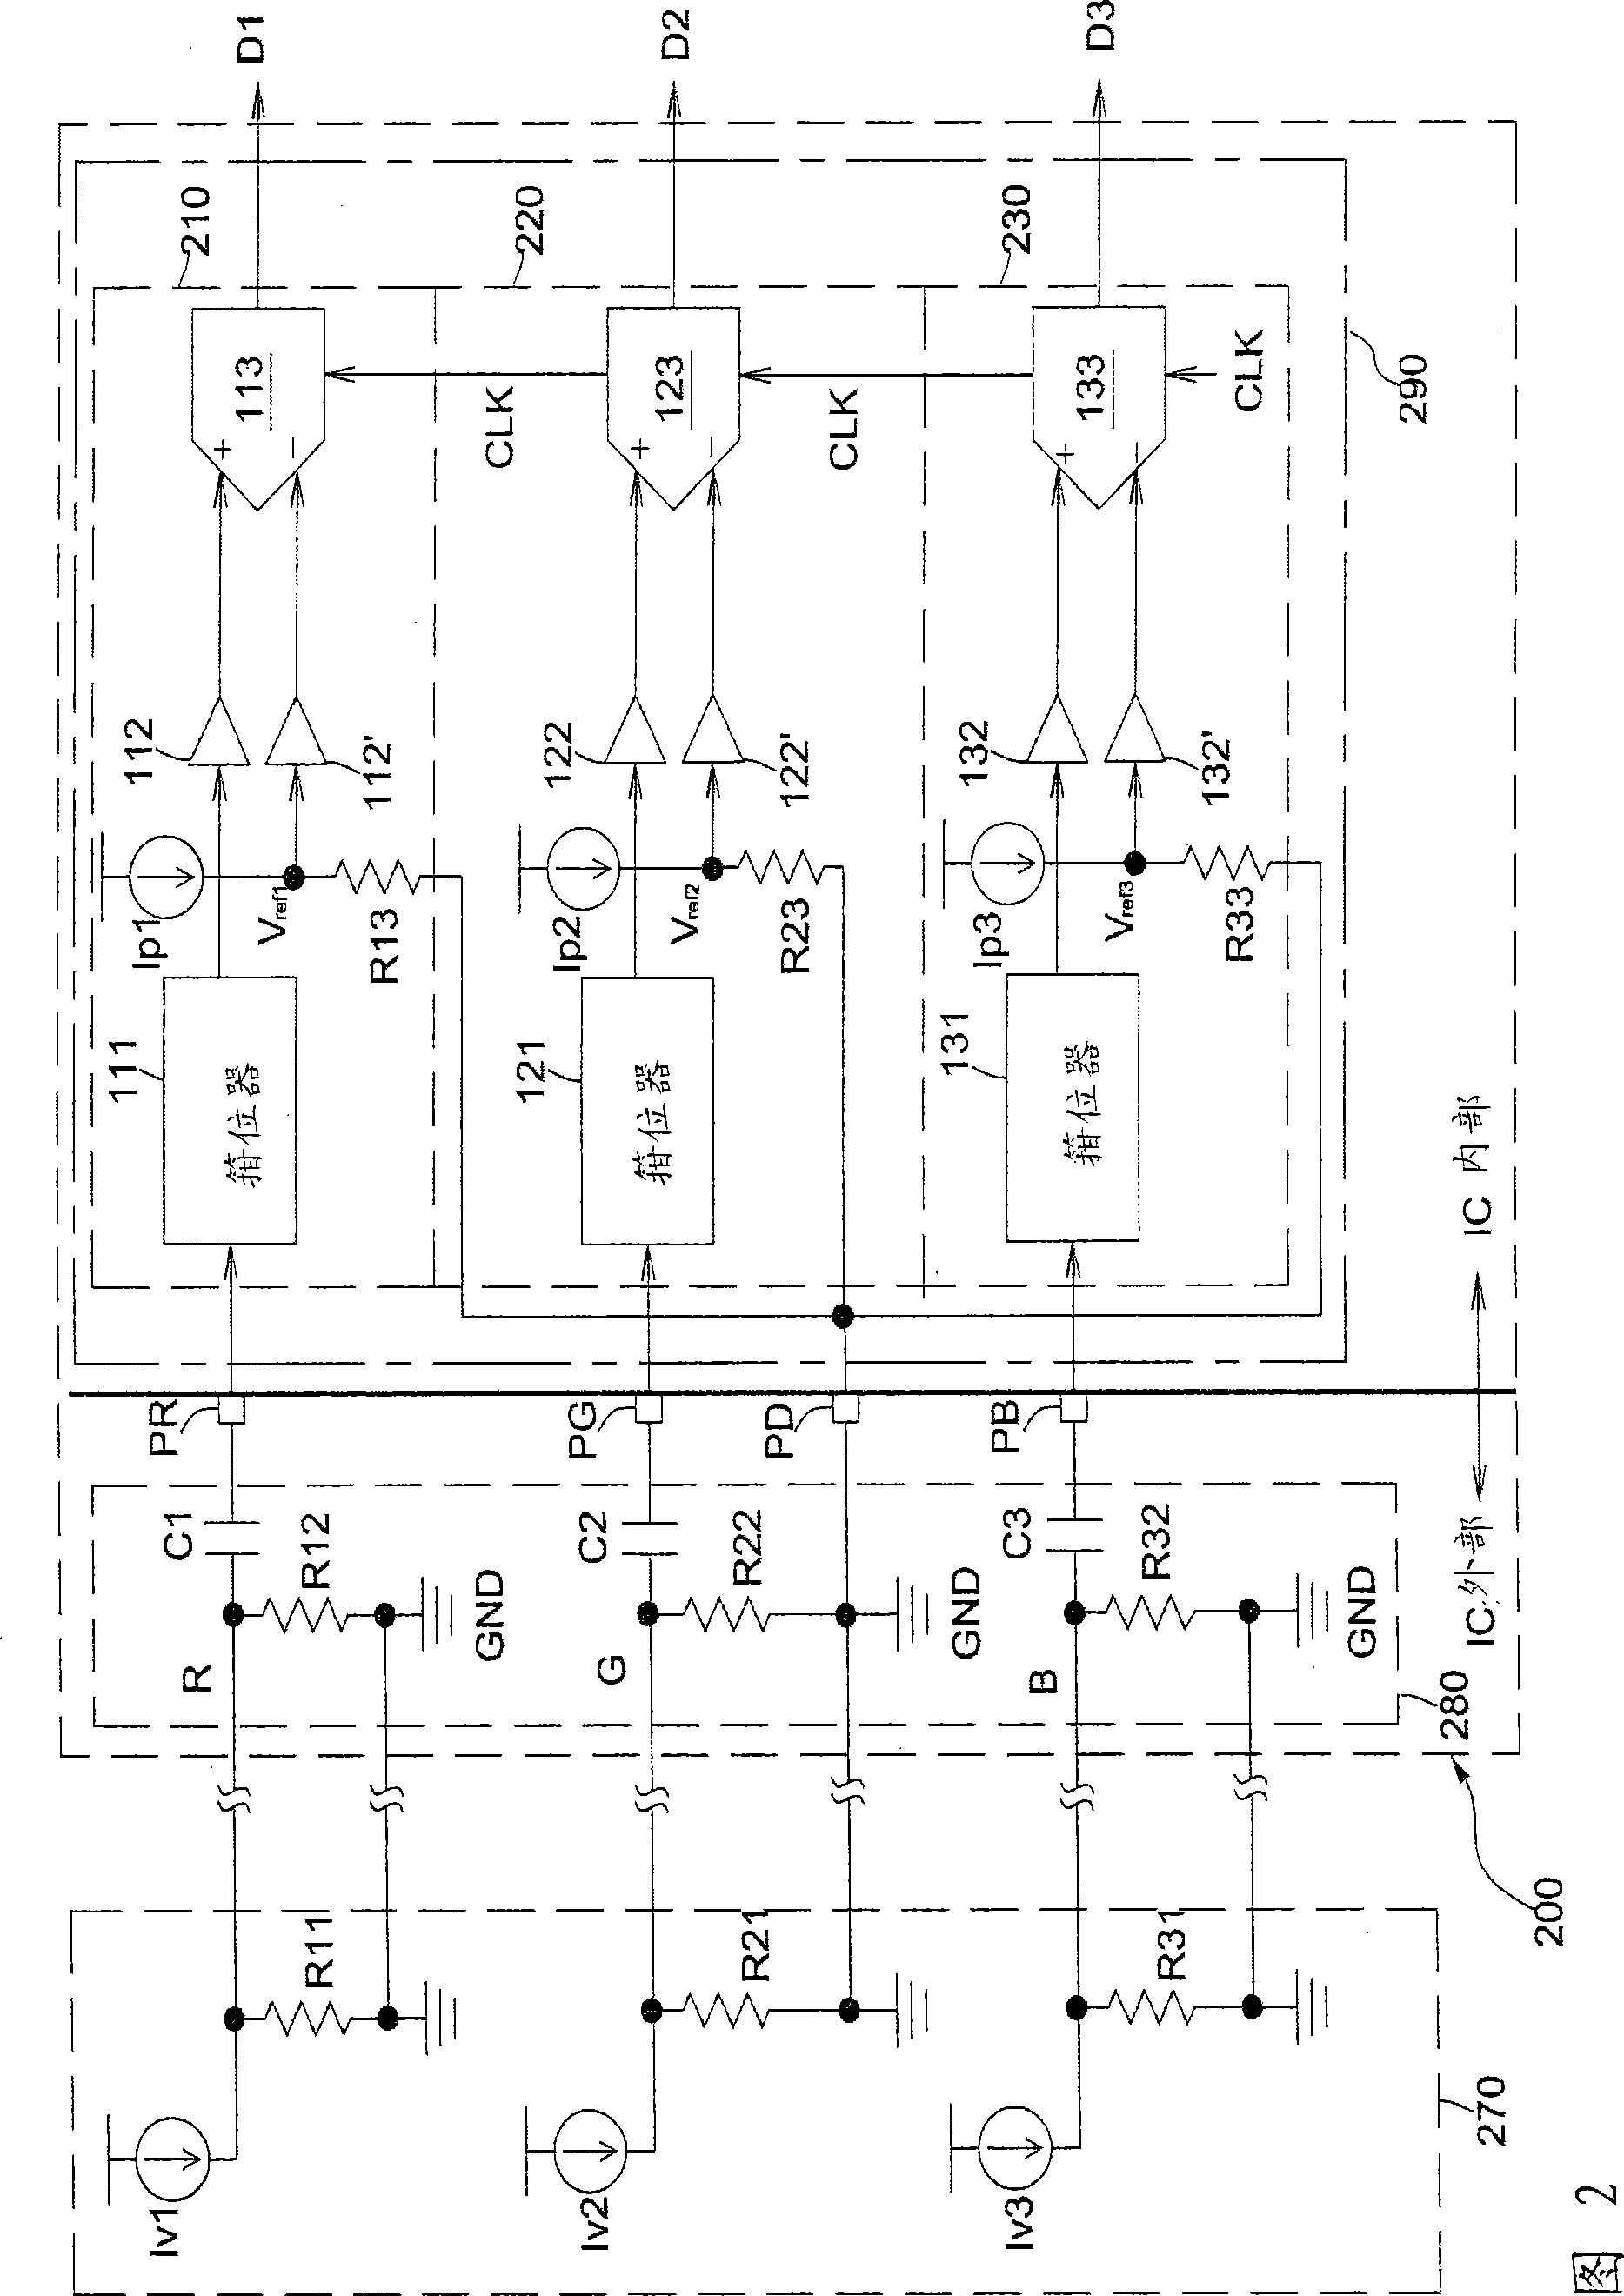 Virtual differential analog front end circuit and image processing apparatus